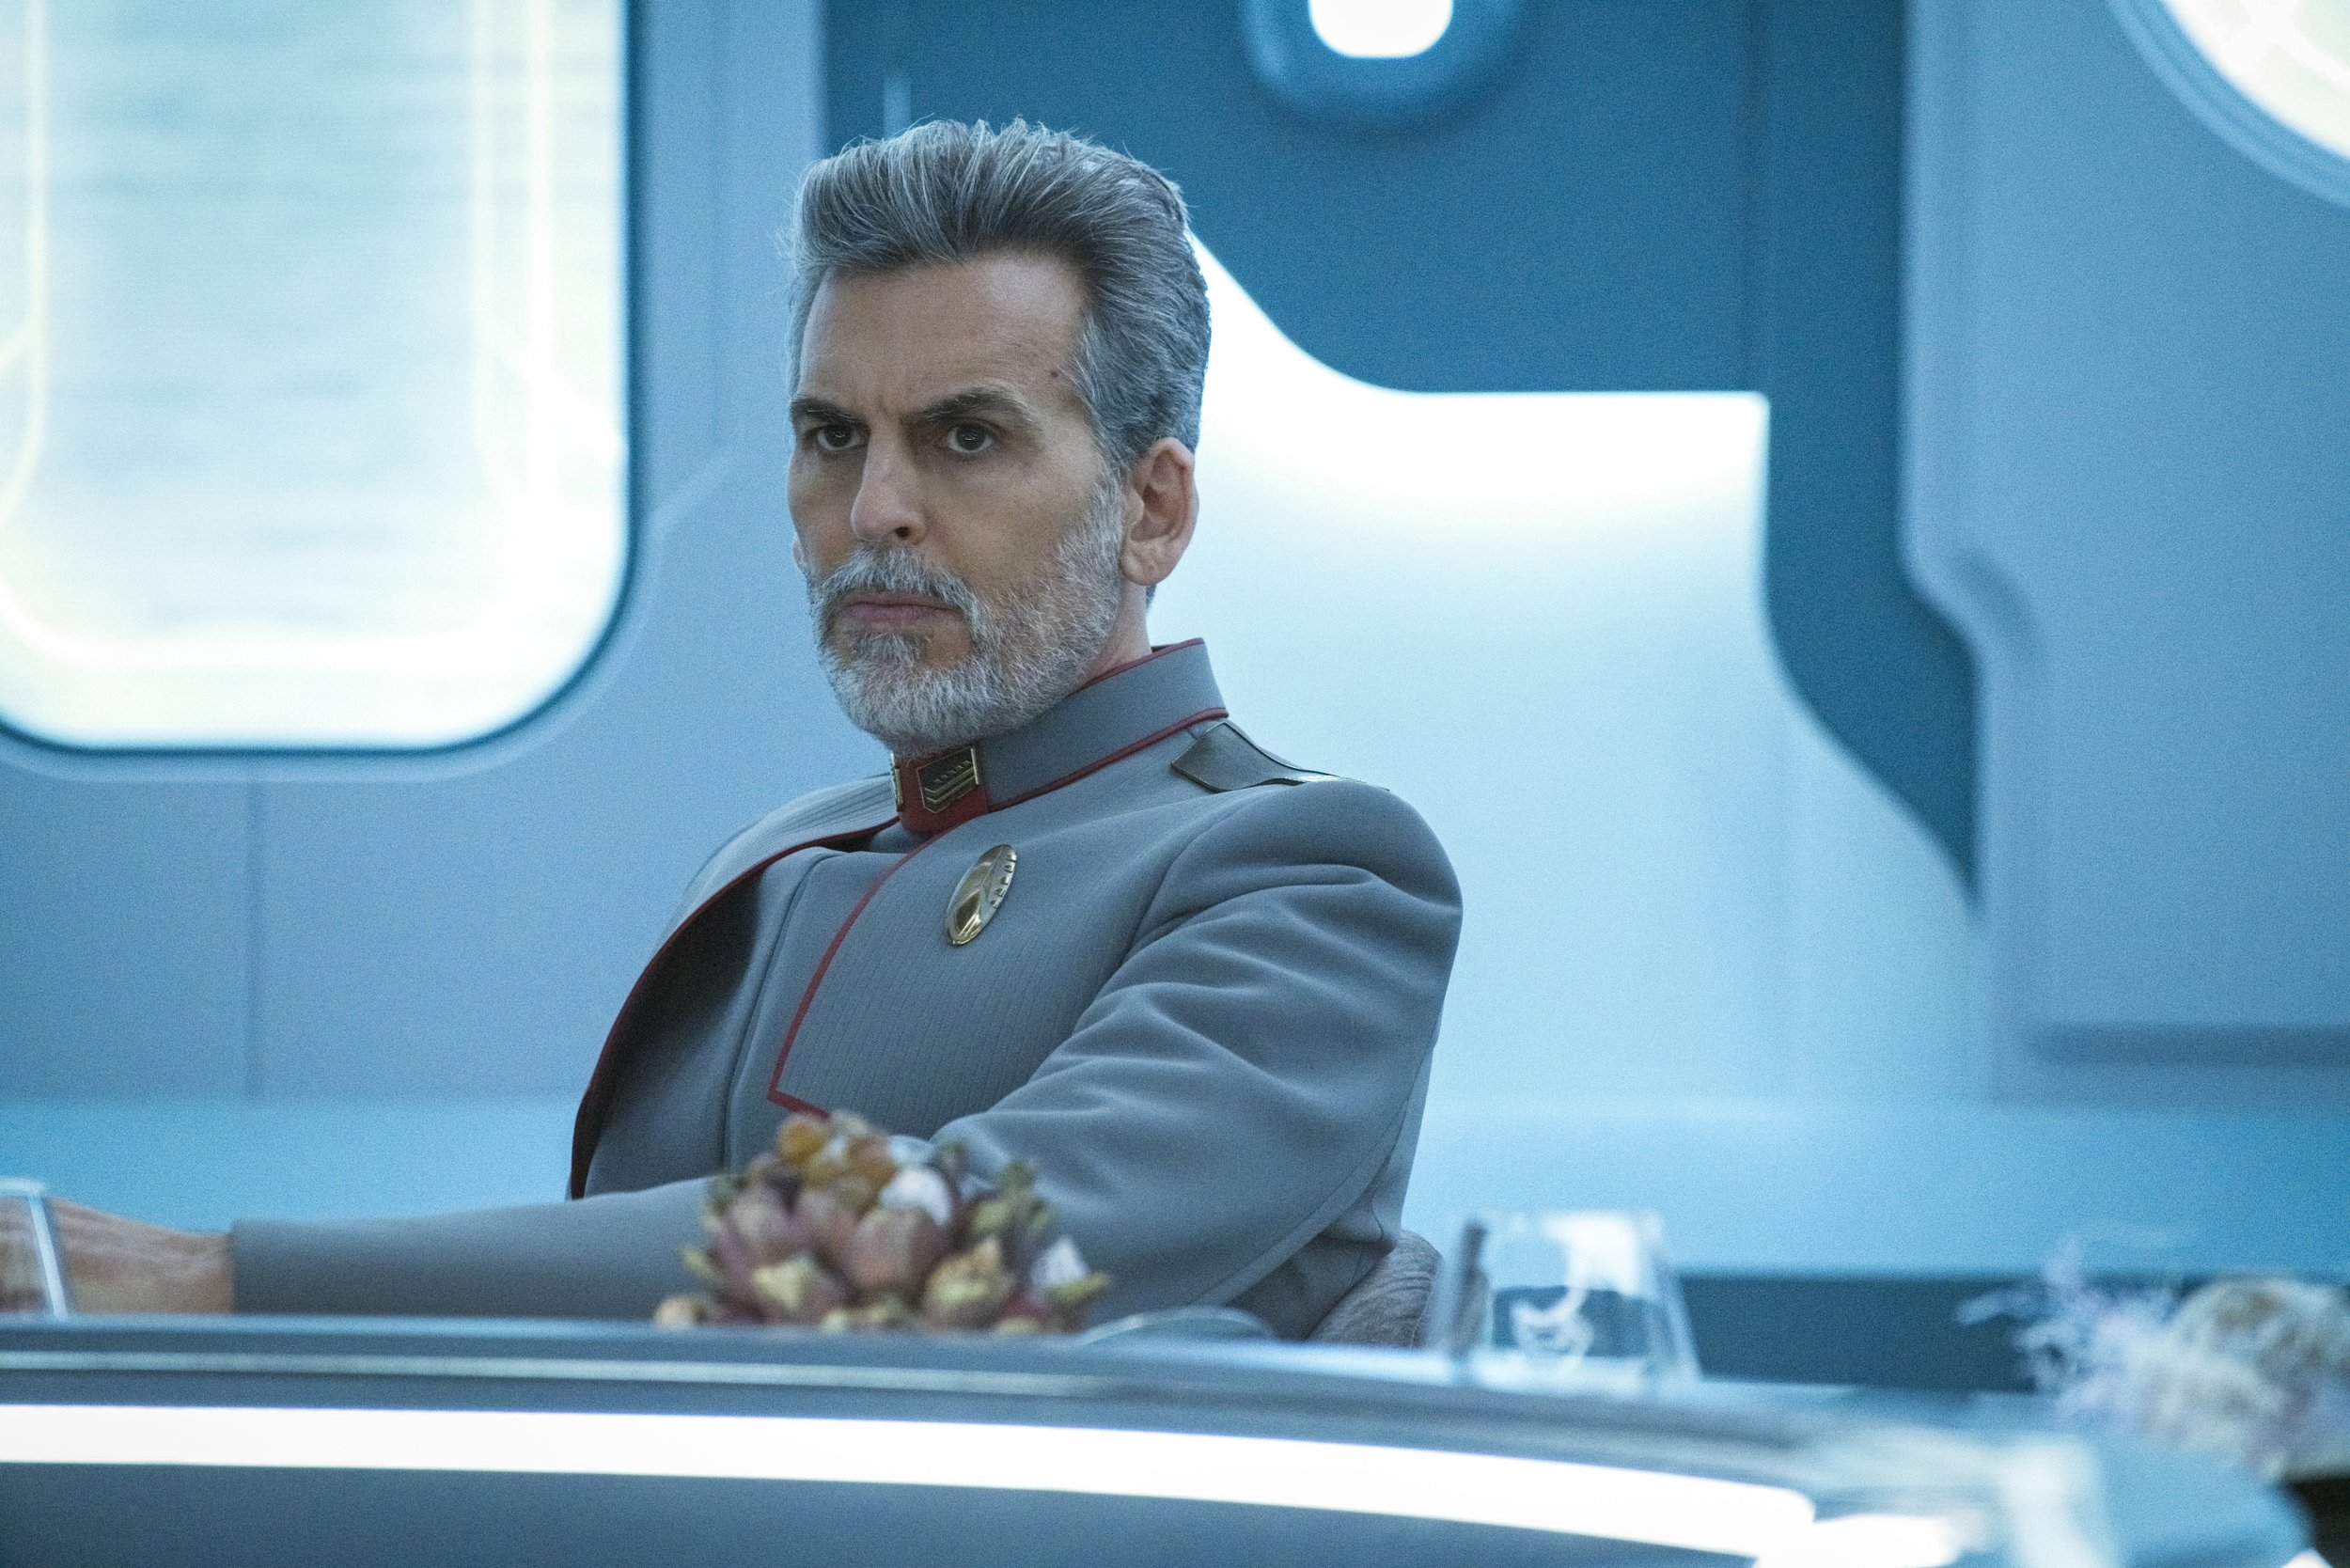   Pictured: Oded Fehr as Admiral Vance of the Paramount+ original series STAR TREK: DISCOVERY. Photo Cr: Michael Gibson/Paramount+ (C) 2021 CBS Interactive. All Rights Reserved.  